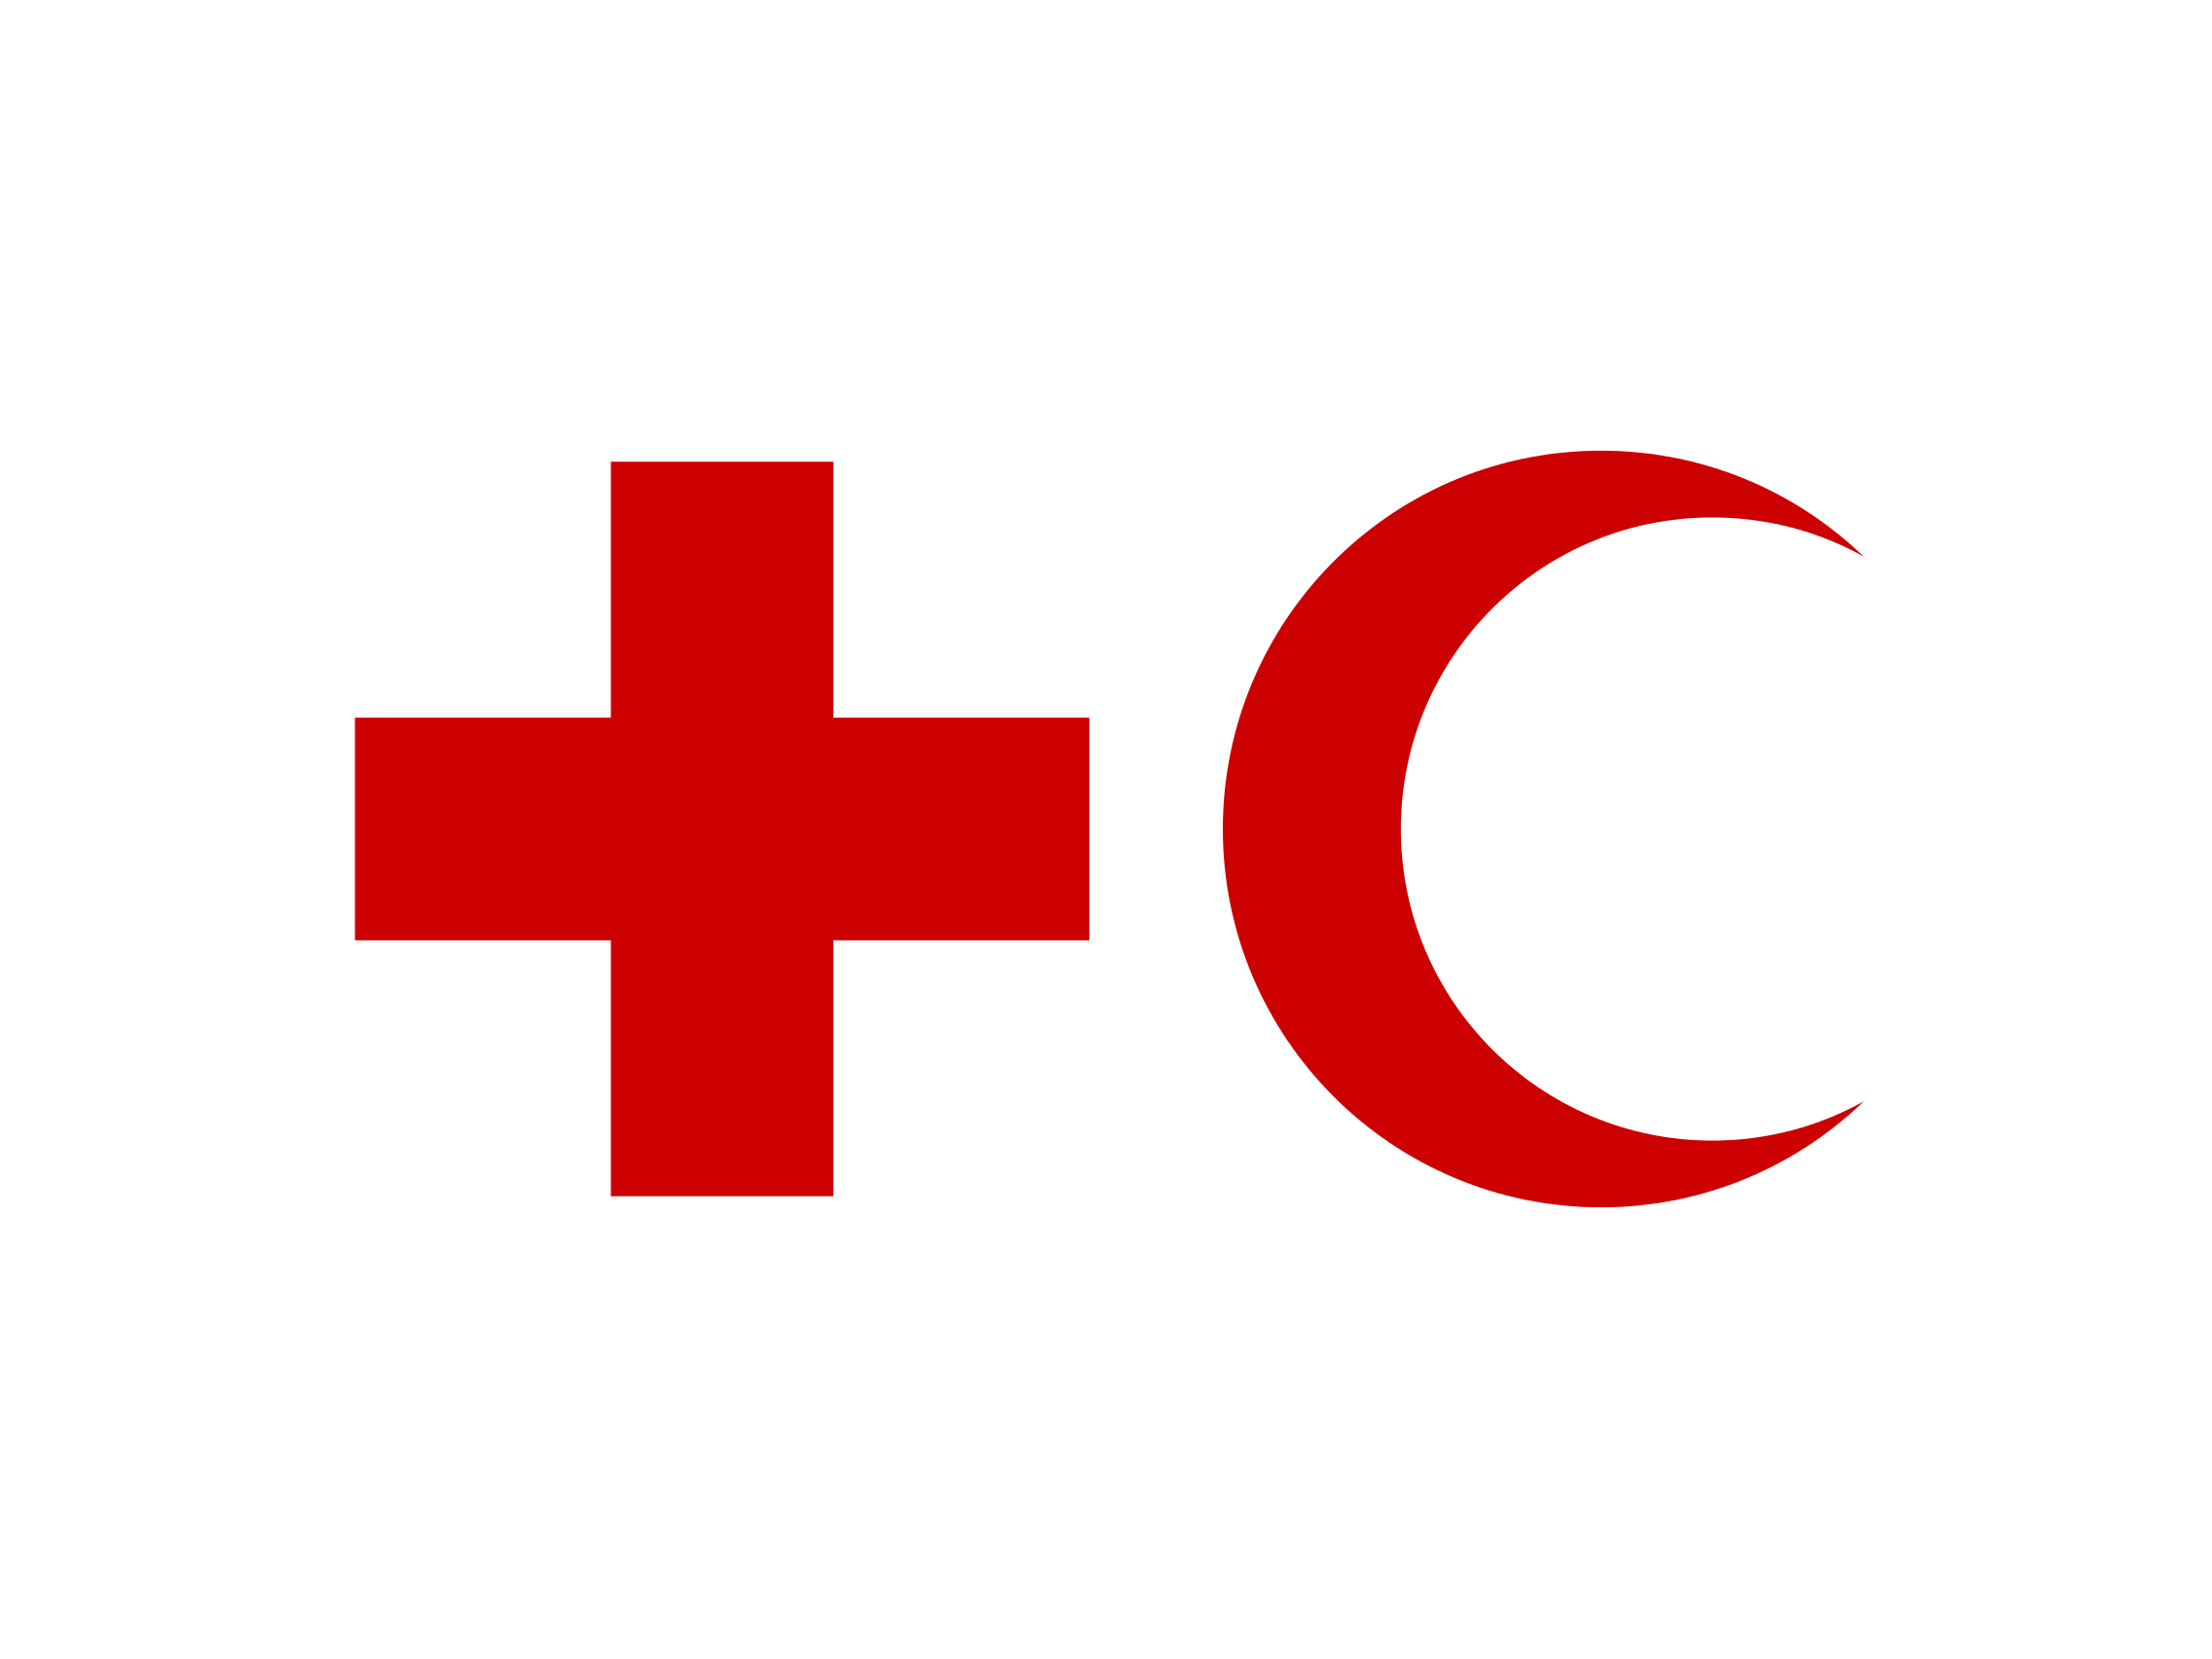 Red Crescent Logo - Red Cross and Red Crescent logo - Logok